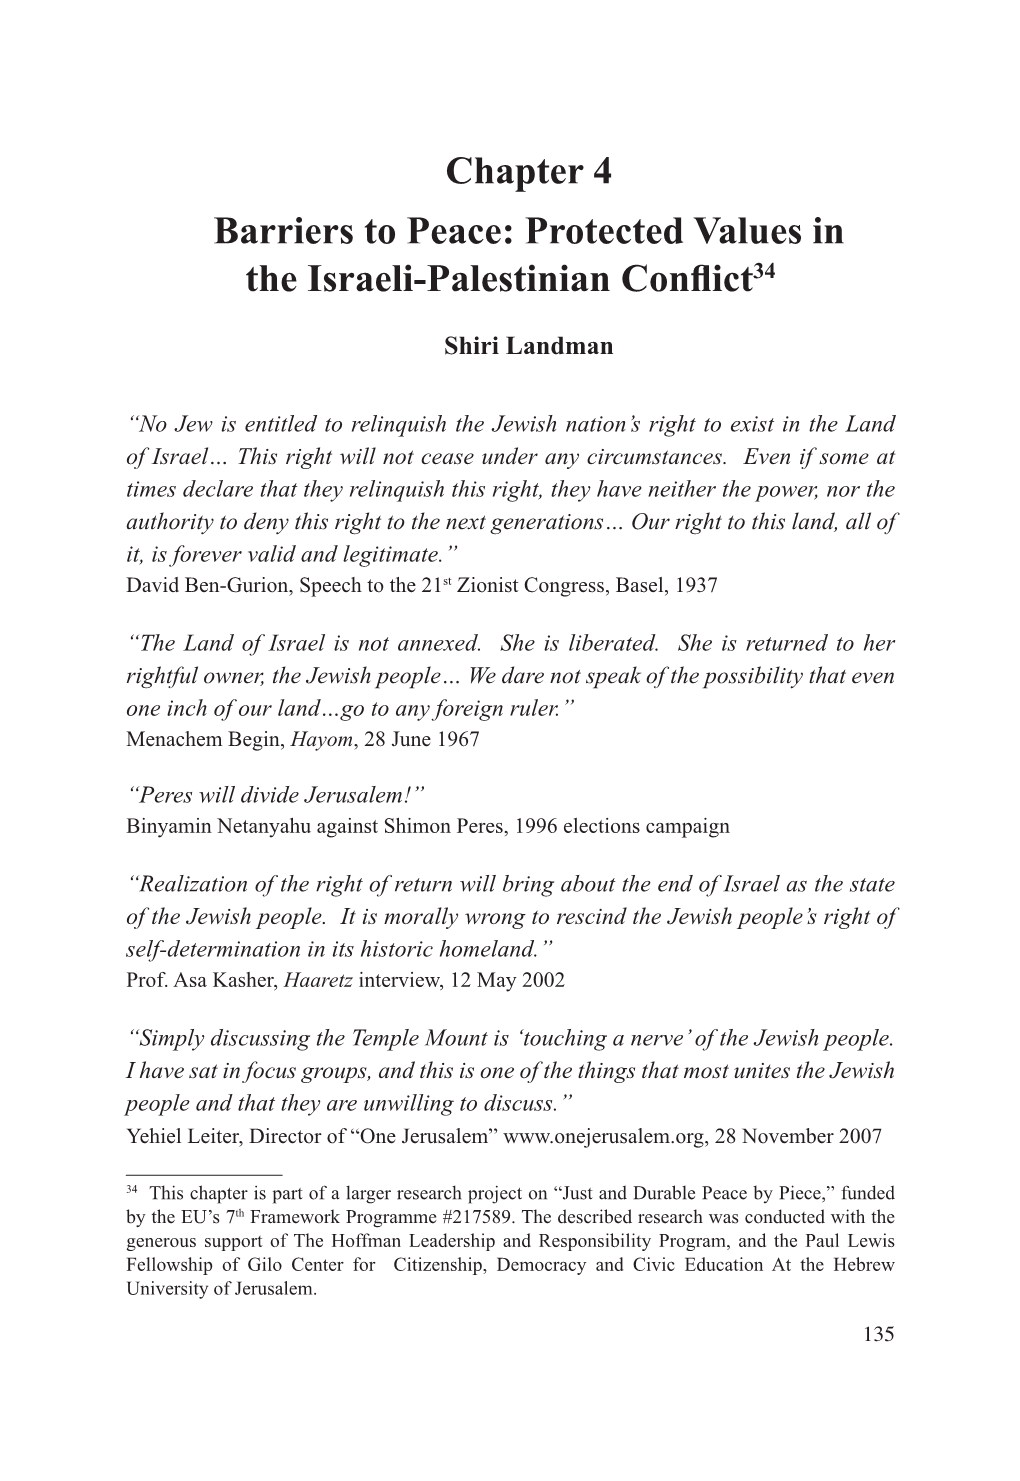 4. Barriers to Peace: Protected Values in the Israeli-Palestinian Conflict